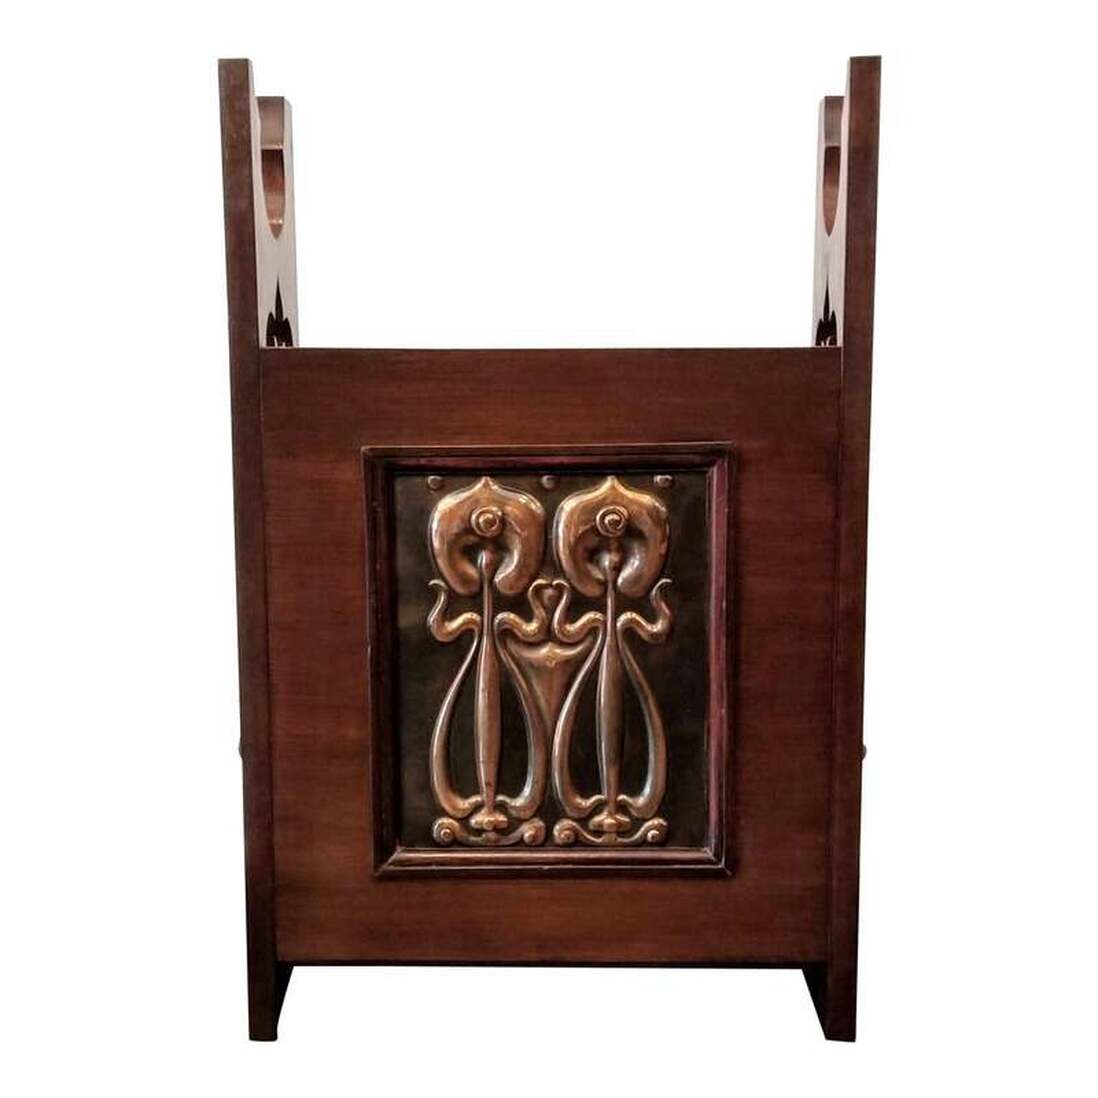 Dark stained oak English Arts & Crafts stand for canes, umbrellas, parasols, walking sticks, and swagger sticks.  The front panel is repousse copper featuring an Art Nouveau floral pattern. Shapland & Petter made many pieces featuring similar copper design and work.  Decorative cutwork on the side panels adds further interest.